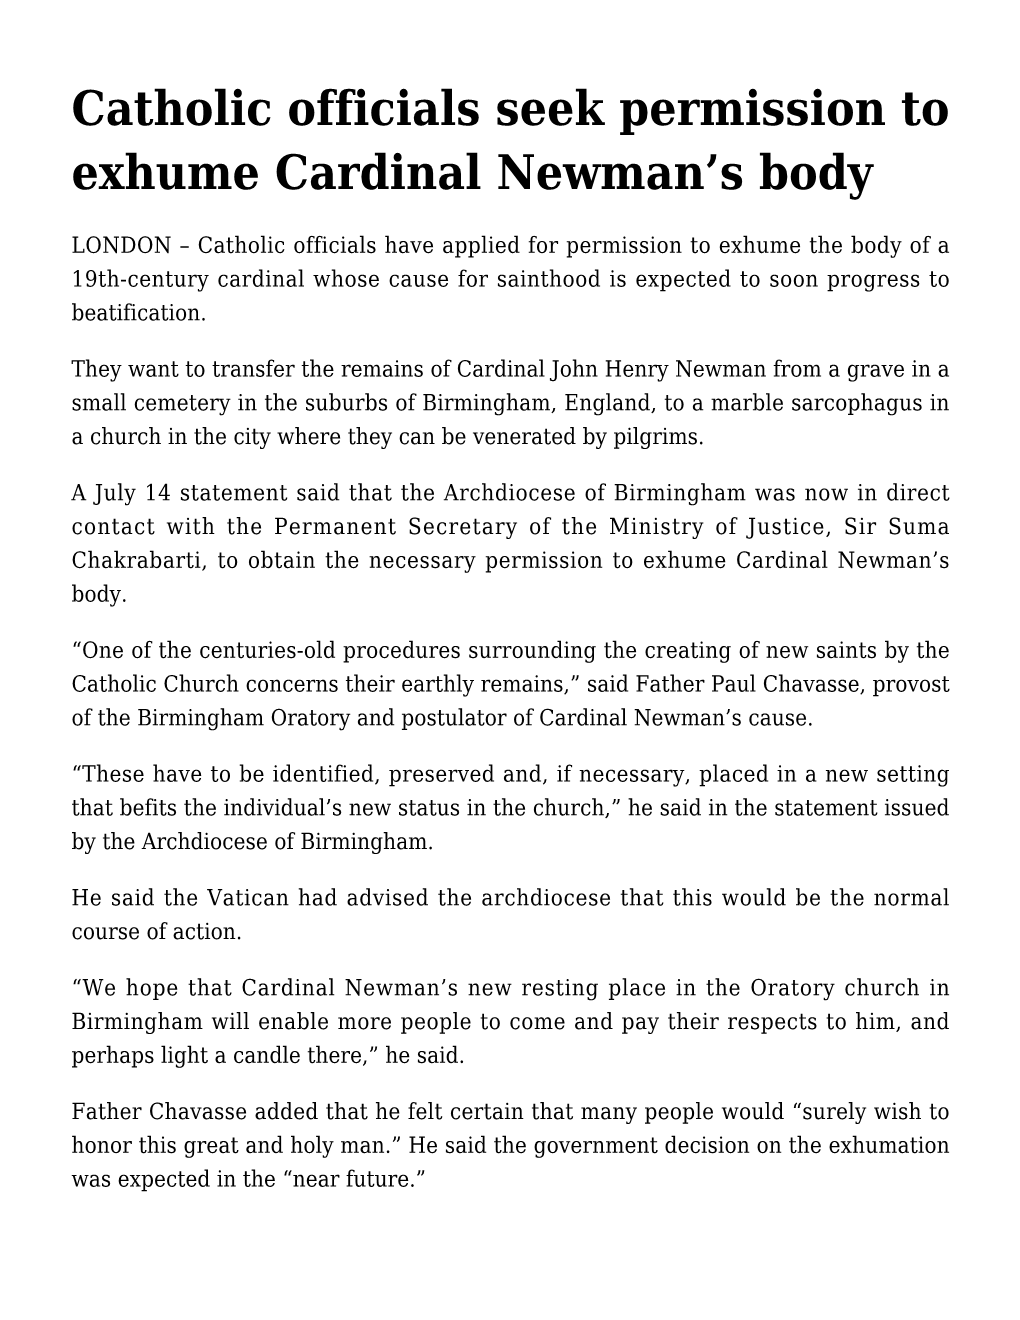 Catholic Officials Seek Permission to Exhume Cardinal Newman's Body